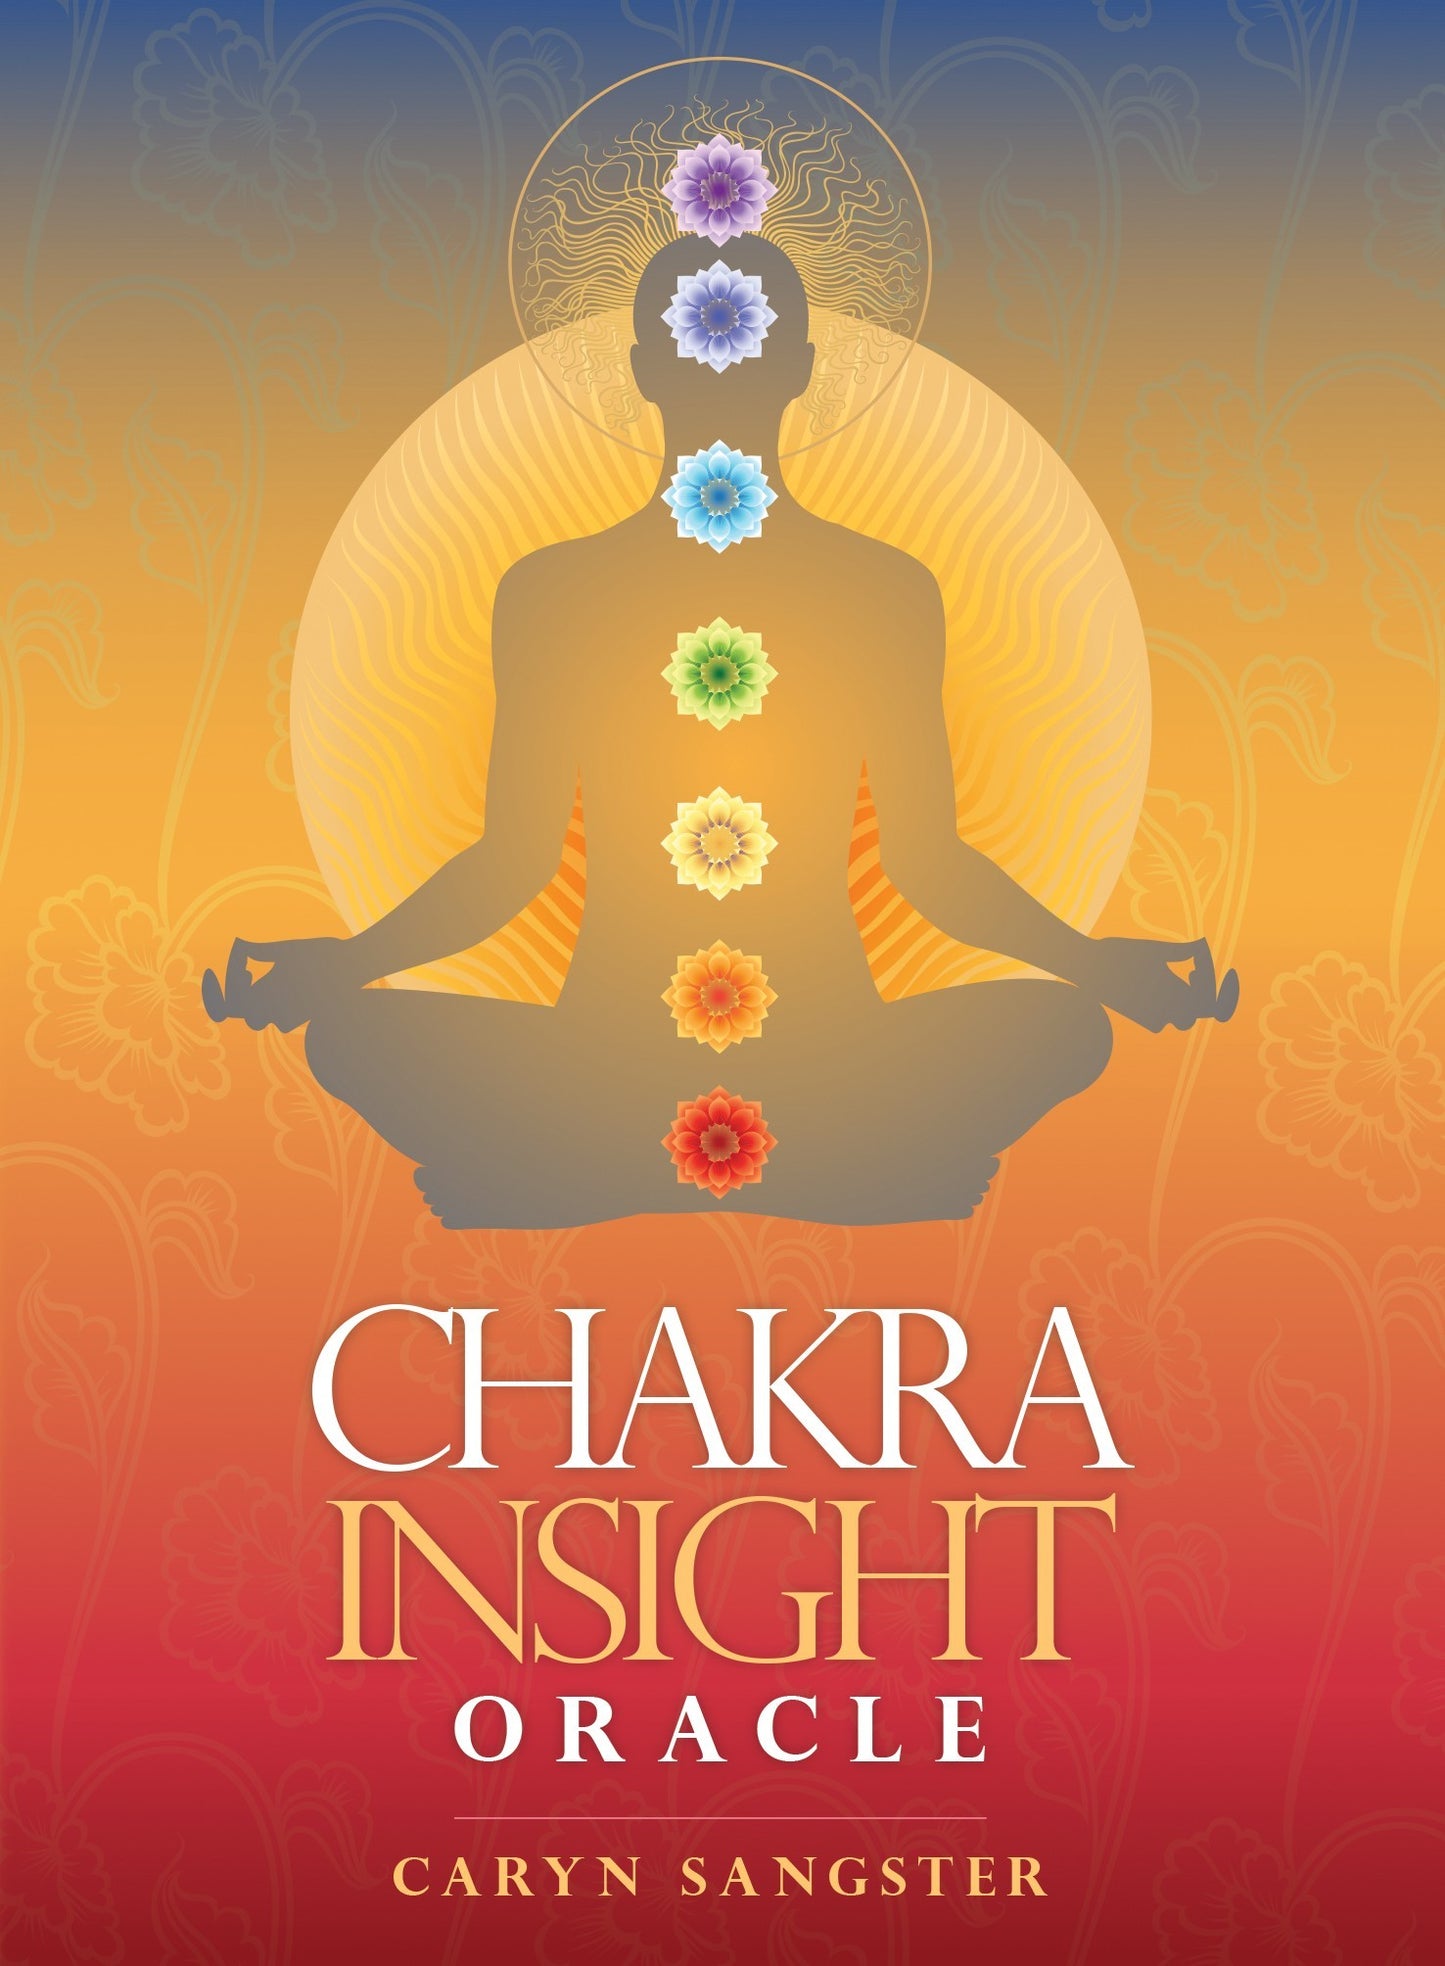 box labeled "chakra insight oracle, by caryn sangster." image depicts a silhouette of a person meditating with images of the seven chakras overlaid on their body.